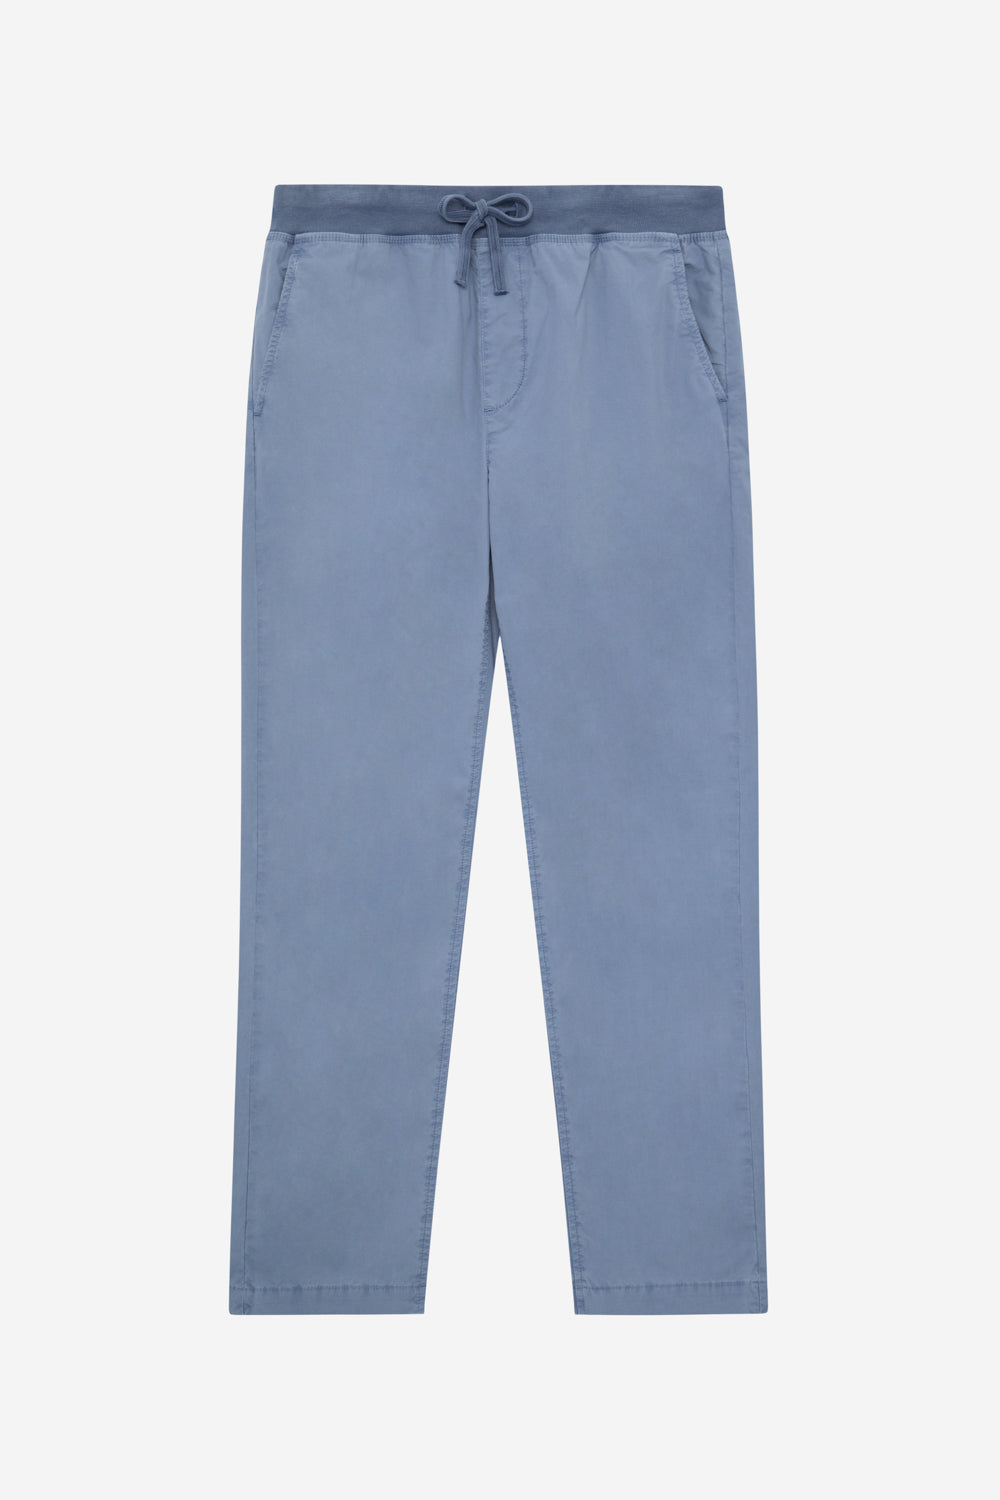 GANGES TROUSERS BLUE